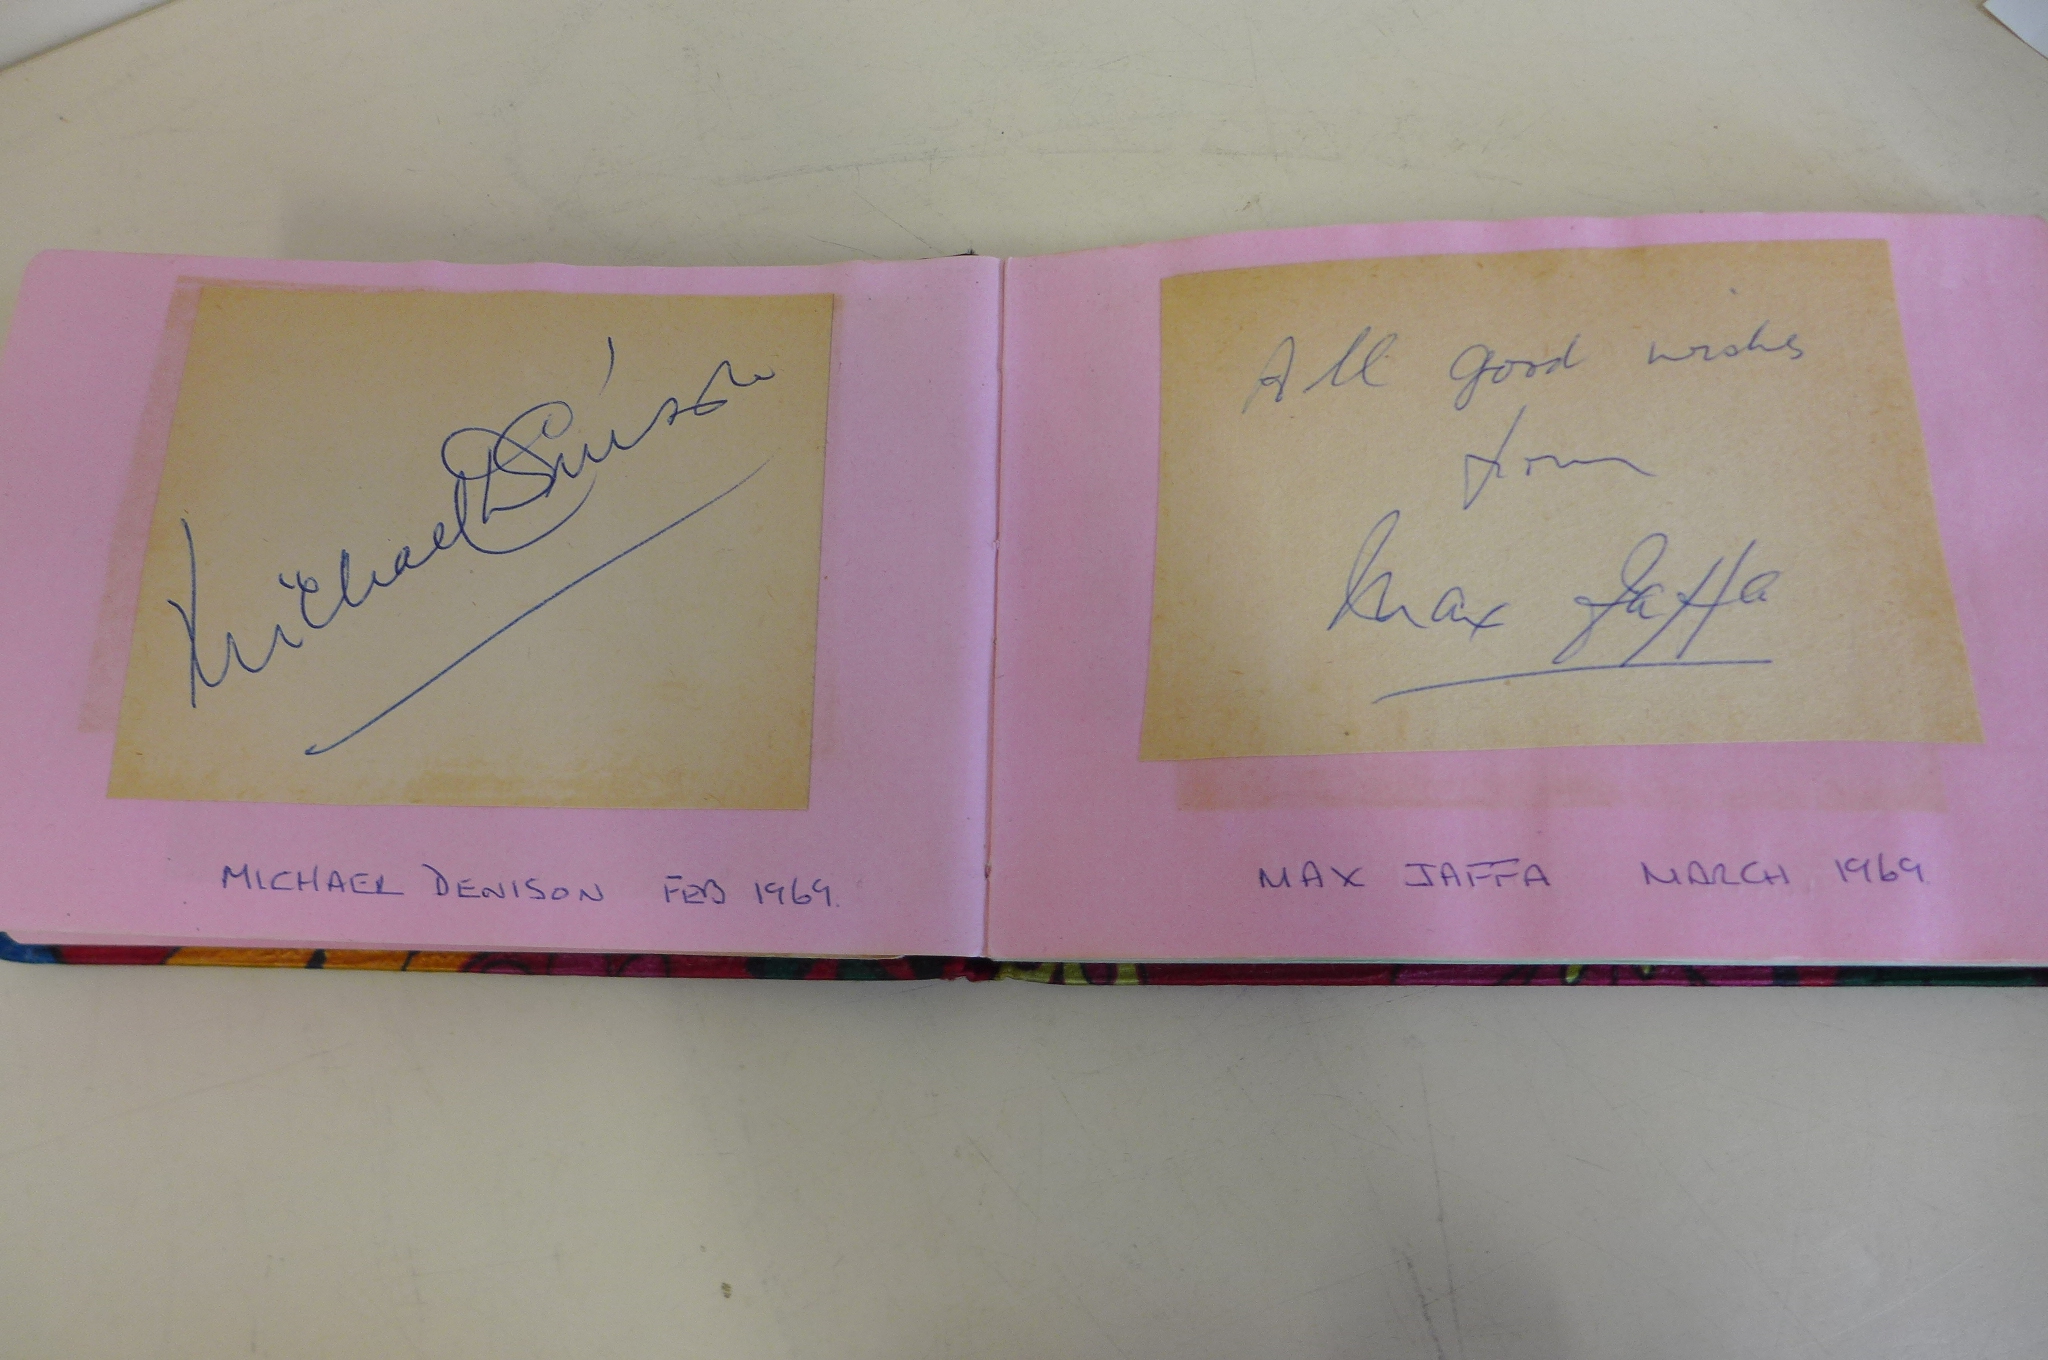 An interesting autograph book with autographs, including Topol, Christopher Lee, Ava Gardner, - Image 3 of 11